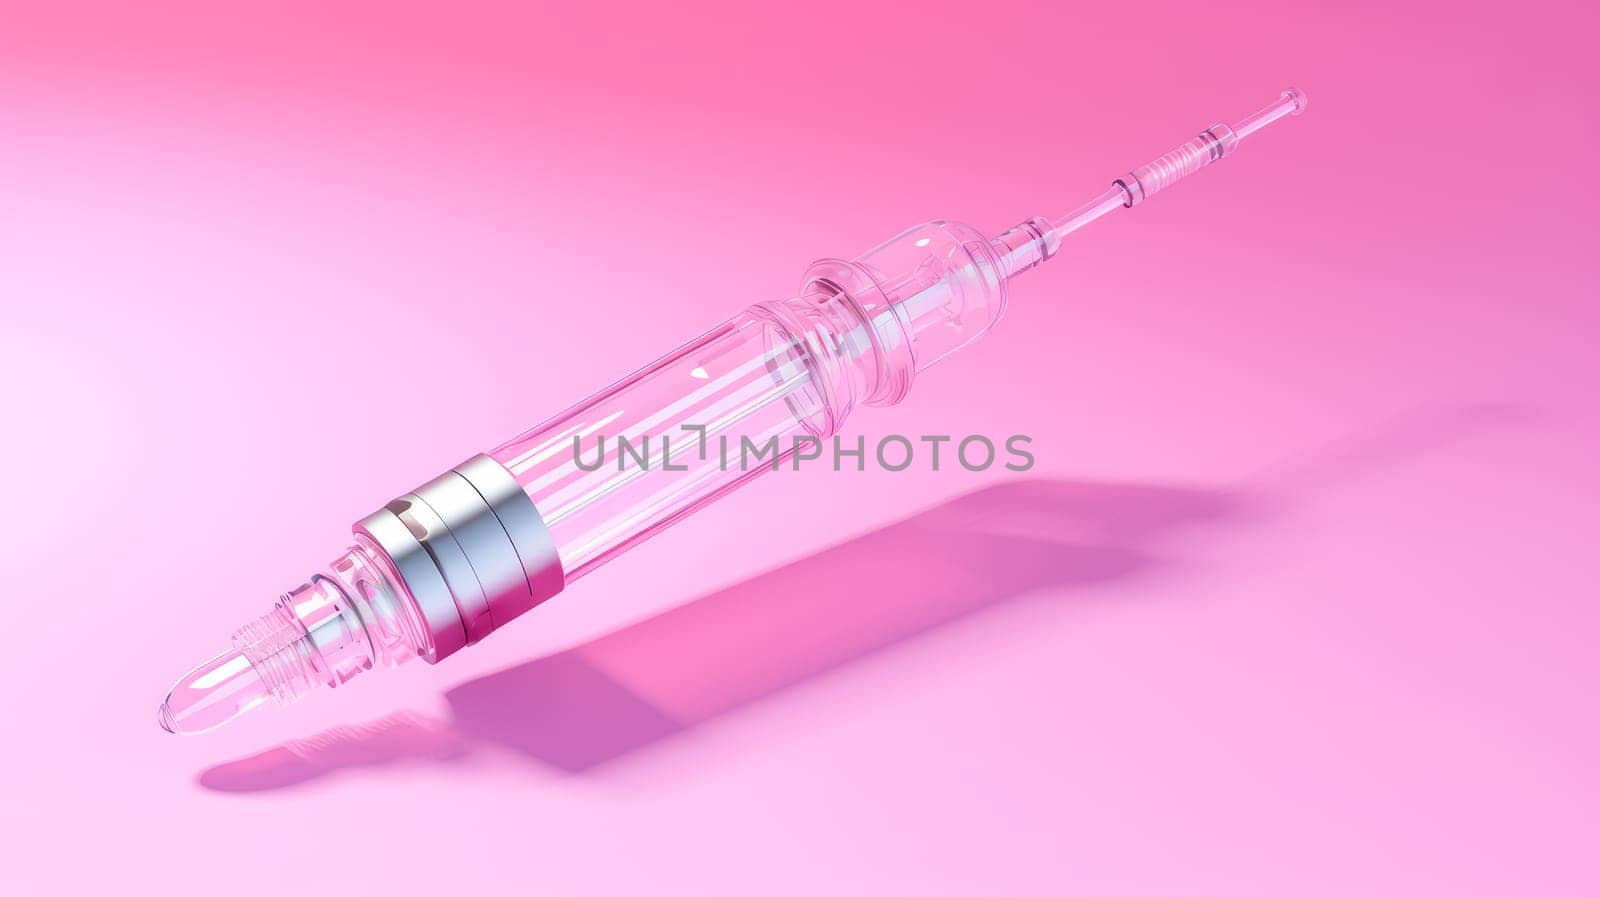 A syringe with a vaccine against diseases on a pink background. by Alla_Yurtayeva